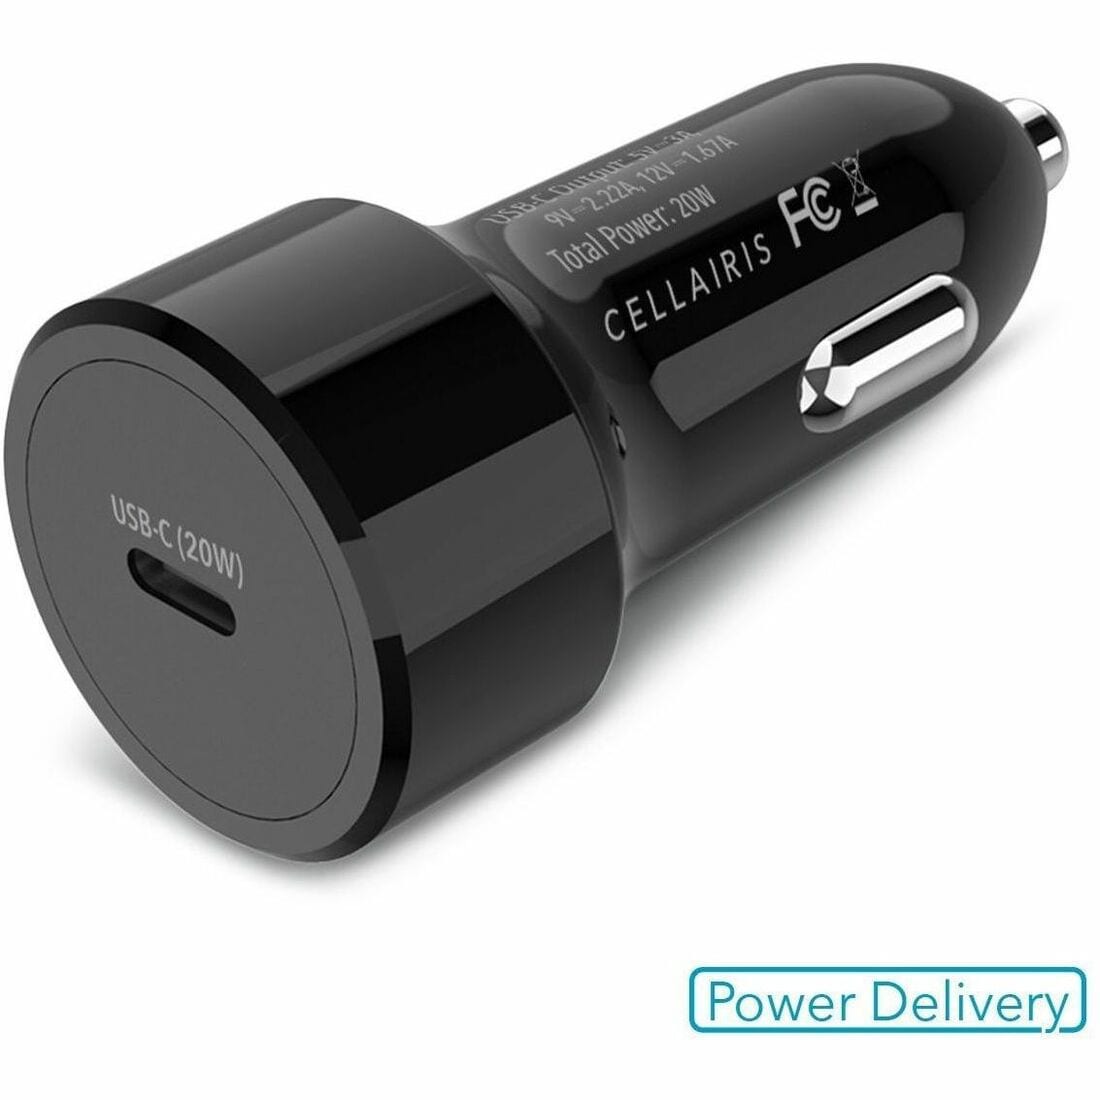 Cellairis Car Charger Power Delivery (PD) 20W